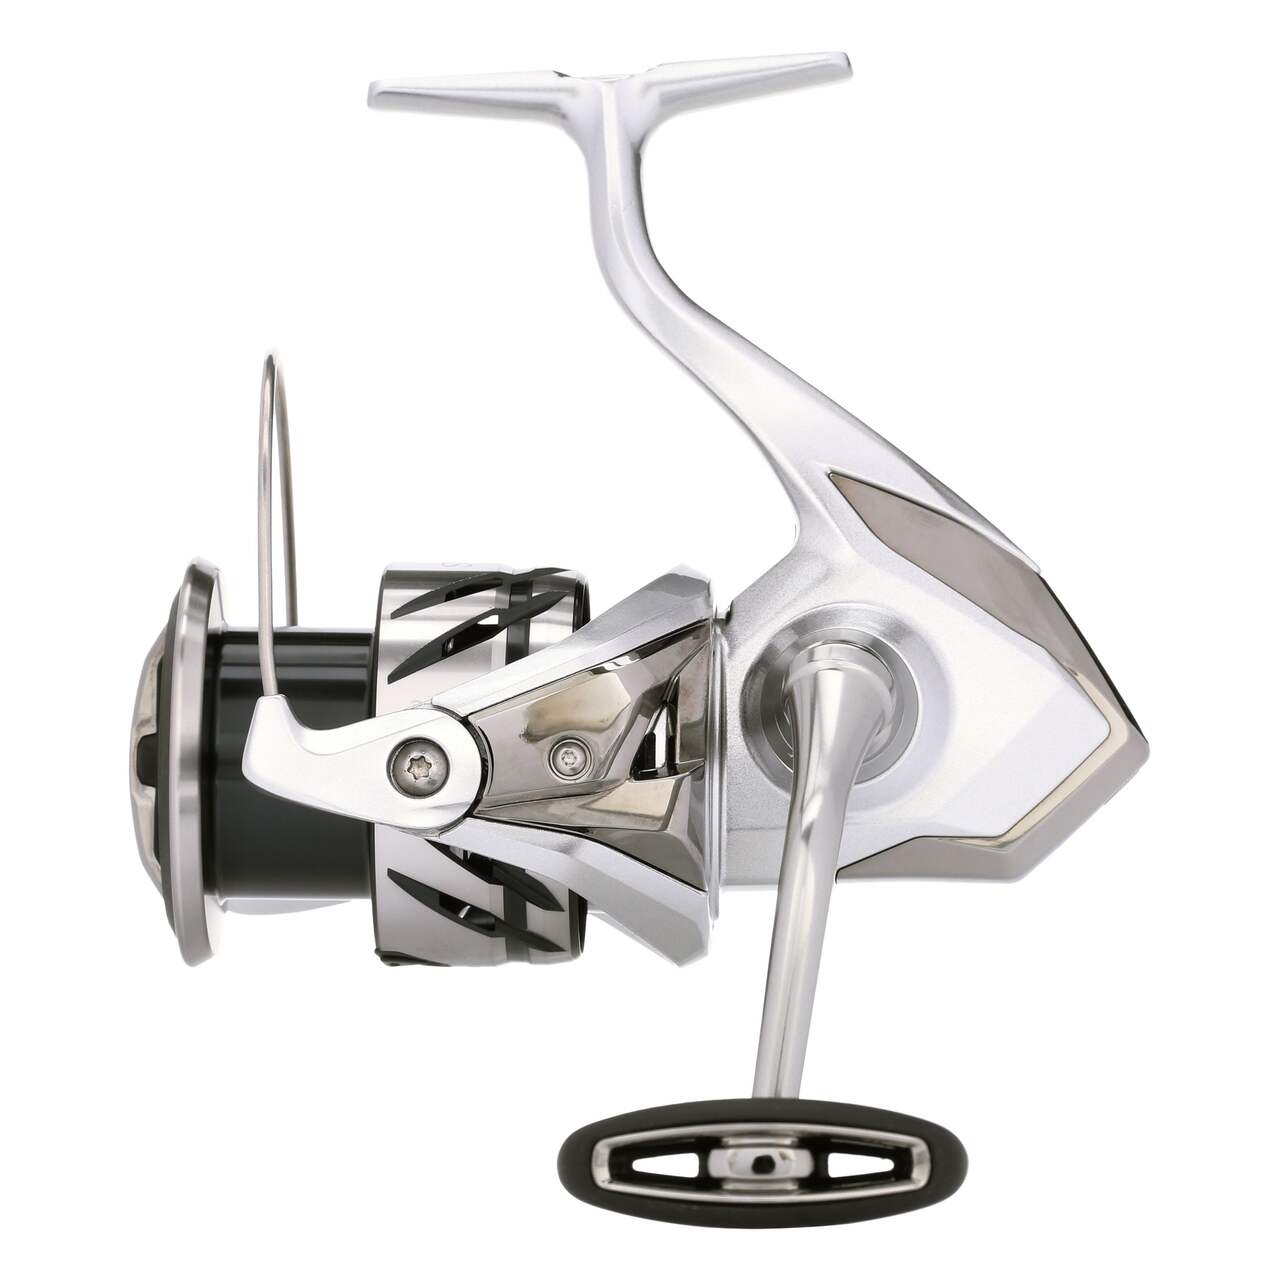 Shimano Stradic FM Spinning Fishing Reel with HAGANE Gear, Right